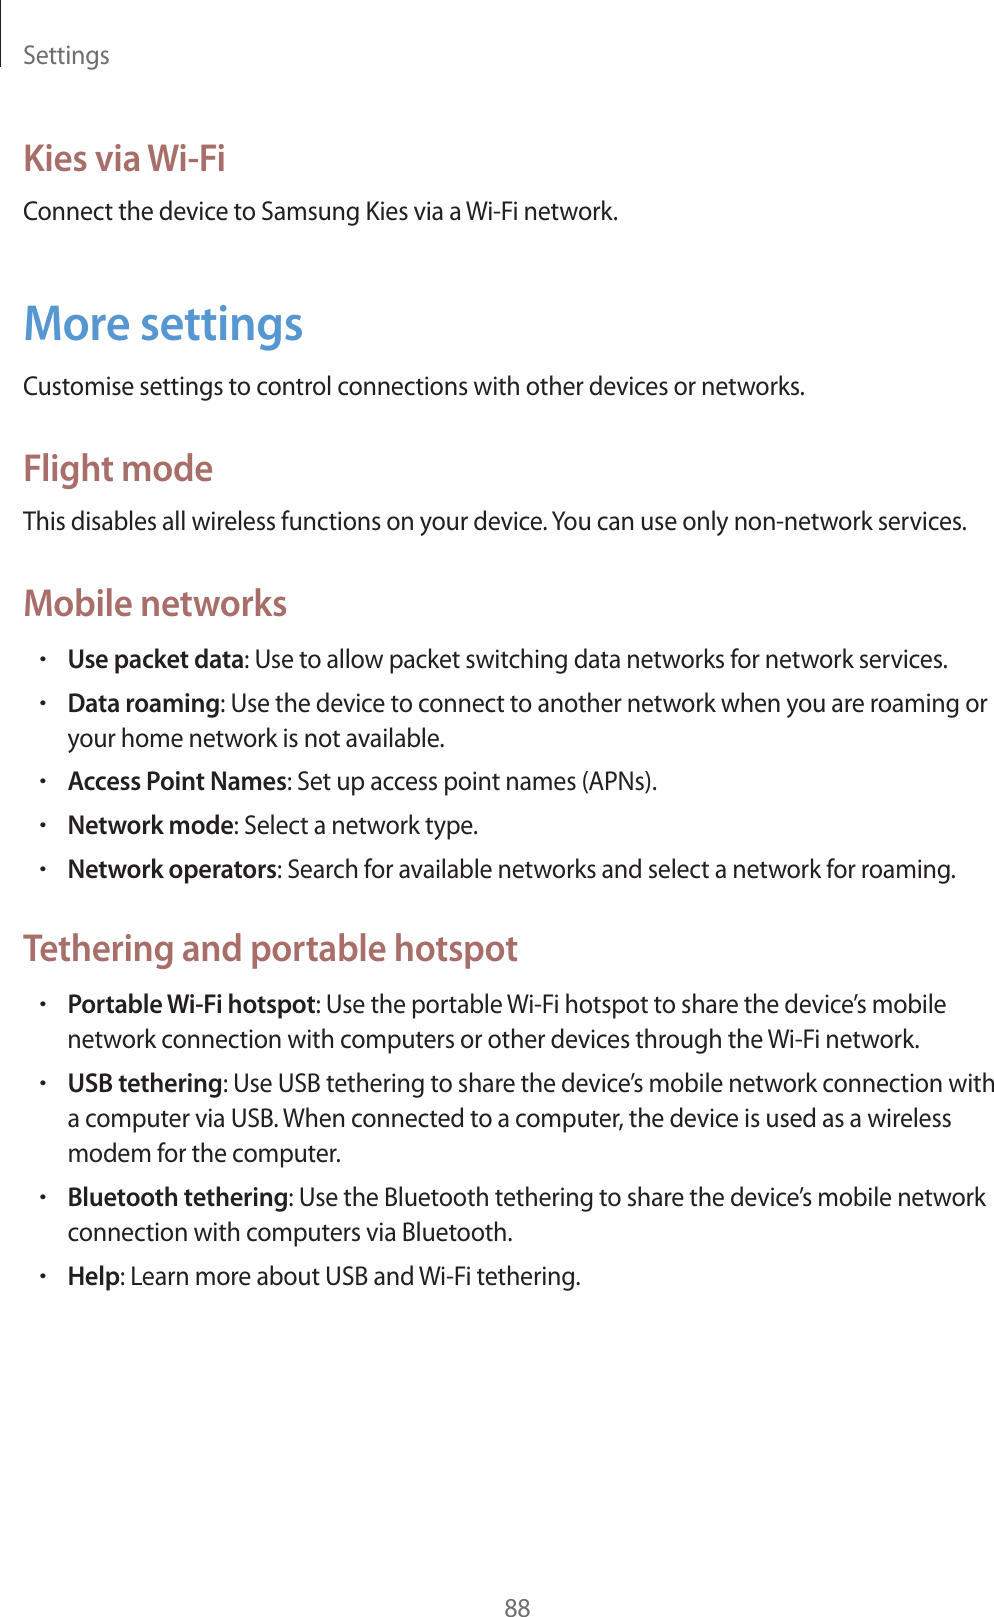 Settings88Kies via Wi-FiConnect the device to Samsung Kies via a Wi-Fi network.More settingsCustomise settings to control connections with other devices or networks.Flight modeThis disables all wireless functions on your device. You can use only non-network services.Mobile networksrUse packet data: Use to allow packet switching data networks for network services.rData roaming: Use the device to connect to another network when you are roaming or your home network is not available.rAccess Point Names: Set up access point names (APNs).rNetwork mode: Select a network type.rNetwork operators: Search for available networks and select a network for roaming.Tethering and portable hotspotrPortable Wi-Fi hotspot: Use the portable Wi-Fi hotspot to share the device’s mobile network connection with computers or other devices through the Wi-Fi network.rUSB tethering: Use USB tethering to share the device’s mobile network connection with a computer via USB. When connected to a computer, the device is used as a wireless modem for the computer.rBluetooth tethering: Use the Bluetooth tethering to share the device’s mobile network connection with computers via Bluetooth.rHelp: Learn more about USB and Wi-Fi tethering.